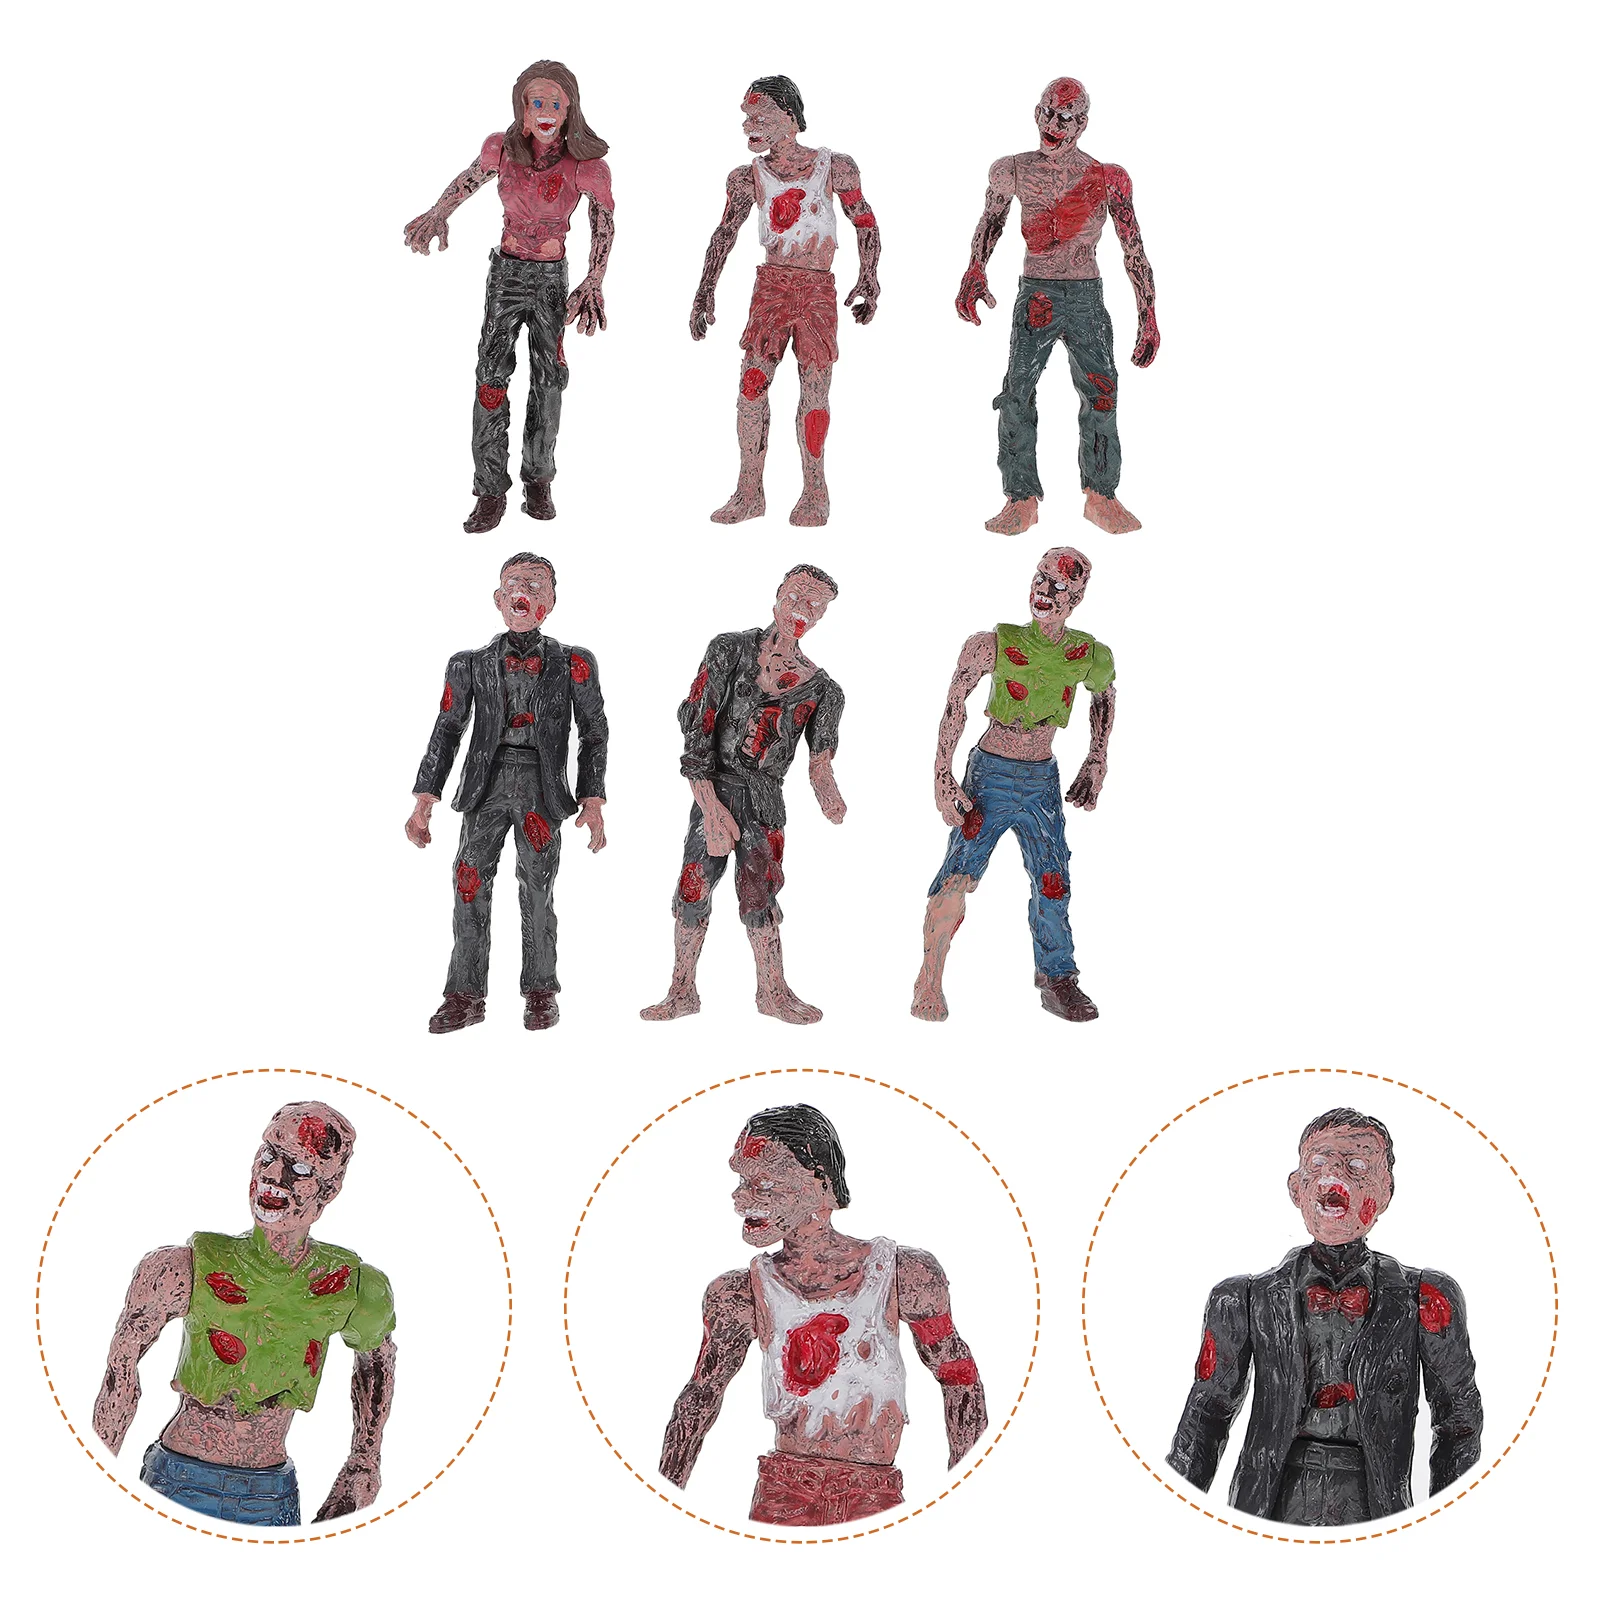 

Dolls Action Figures Toys 6Pcs- Terror Toys Action Joints Miniature Model Walking Dead Corpse- Gift for Decorating Rooms, Desk,